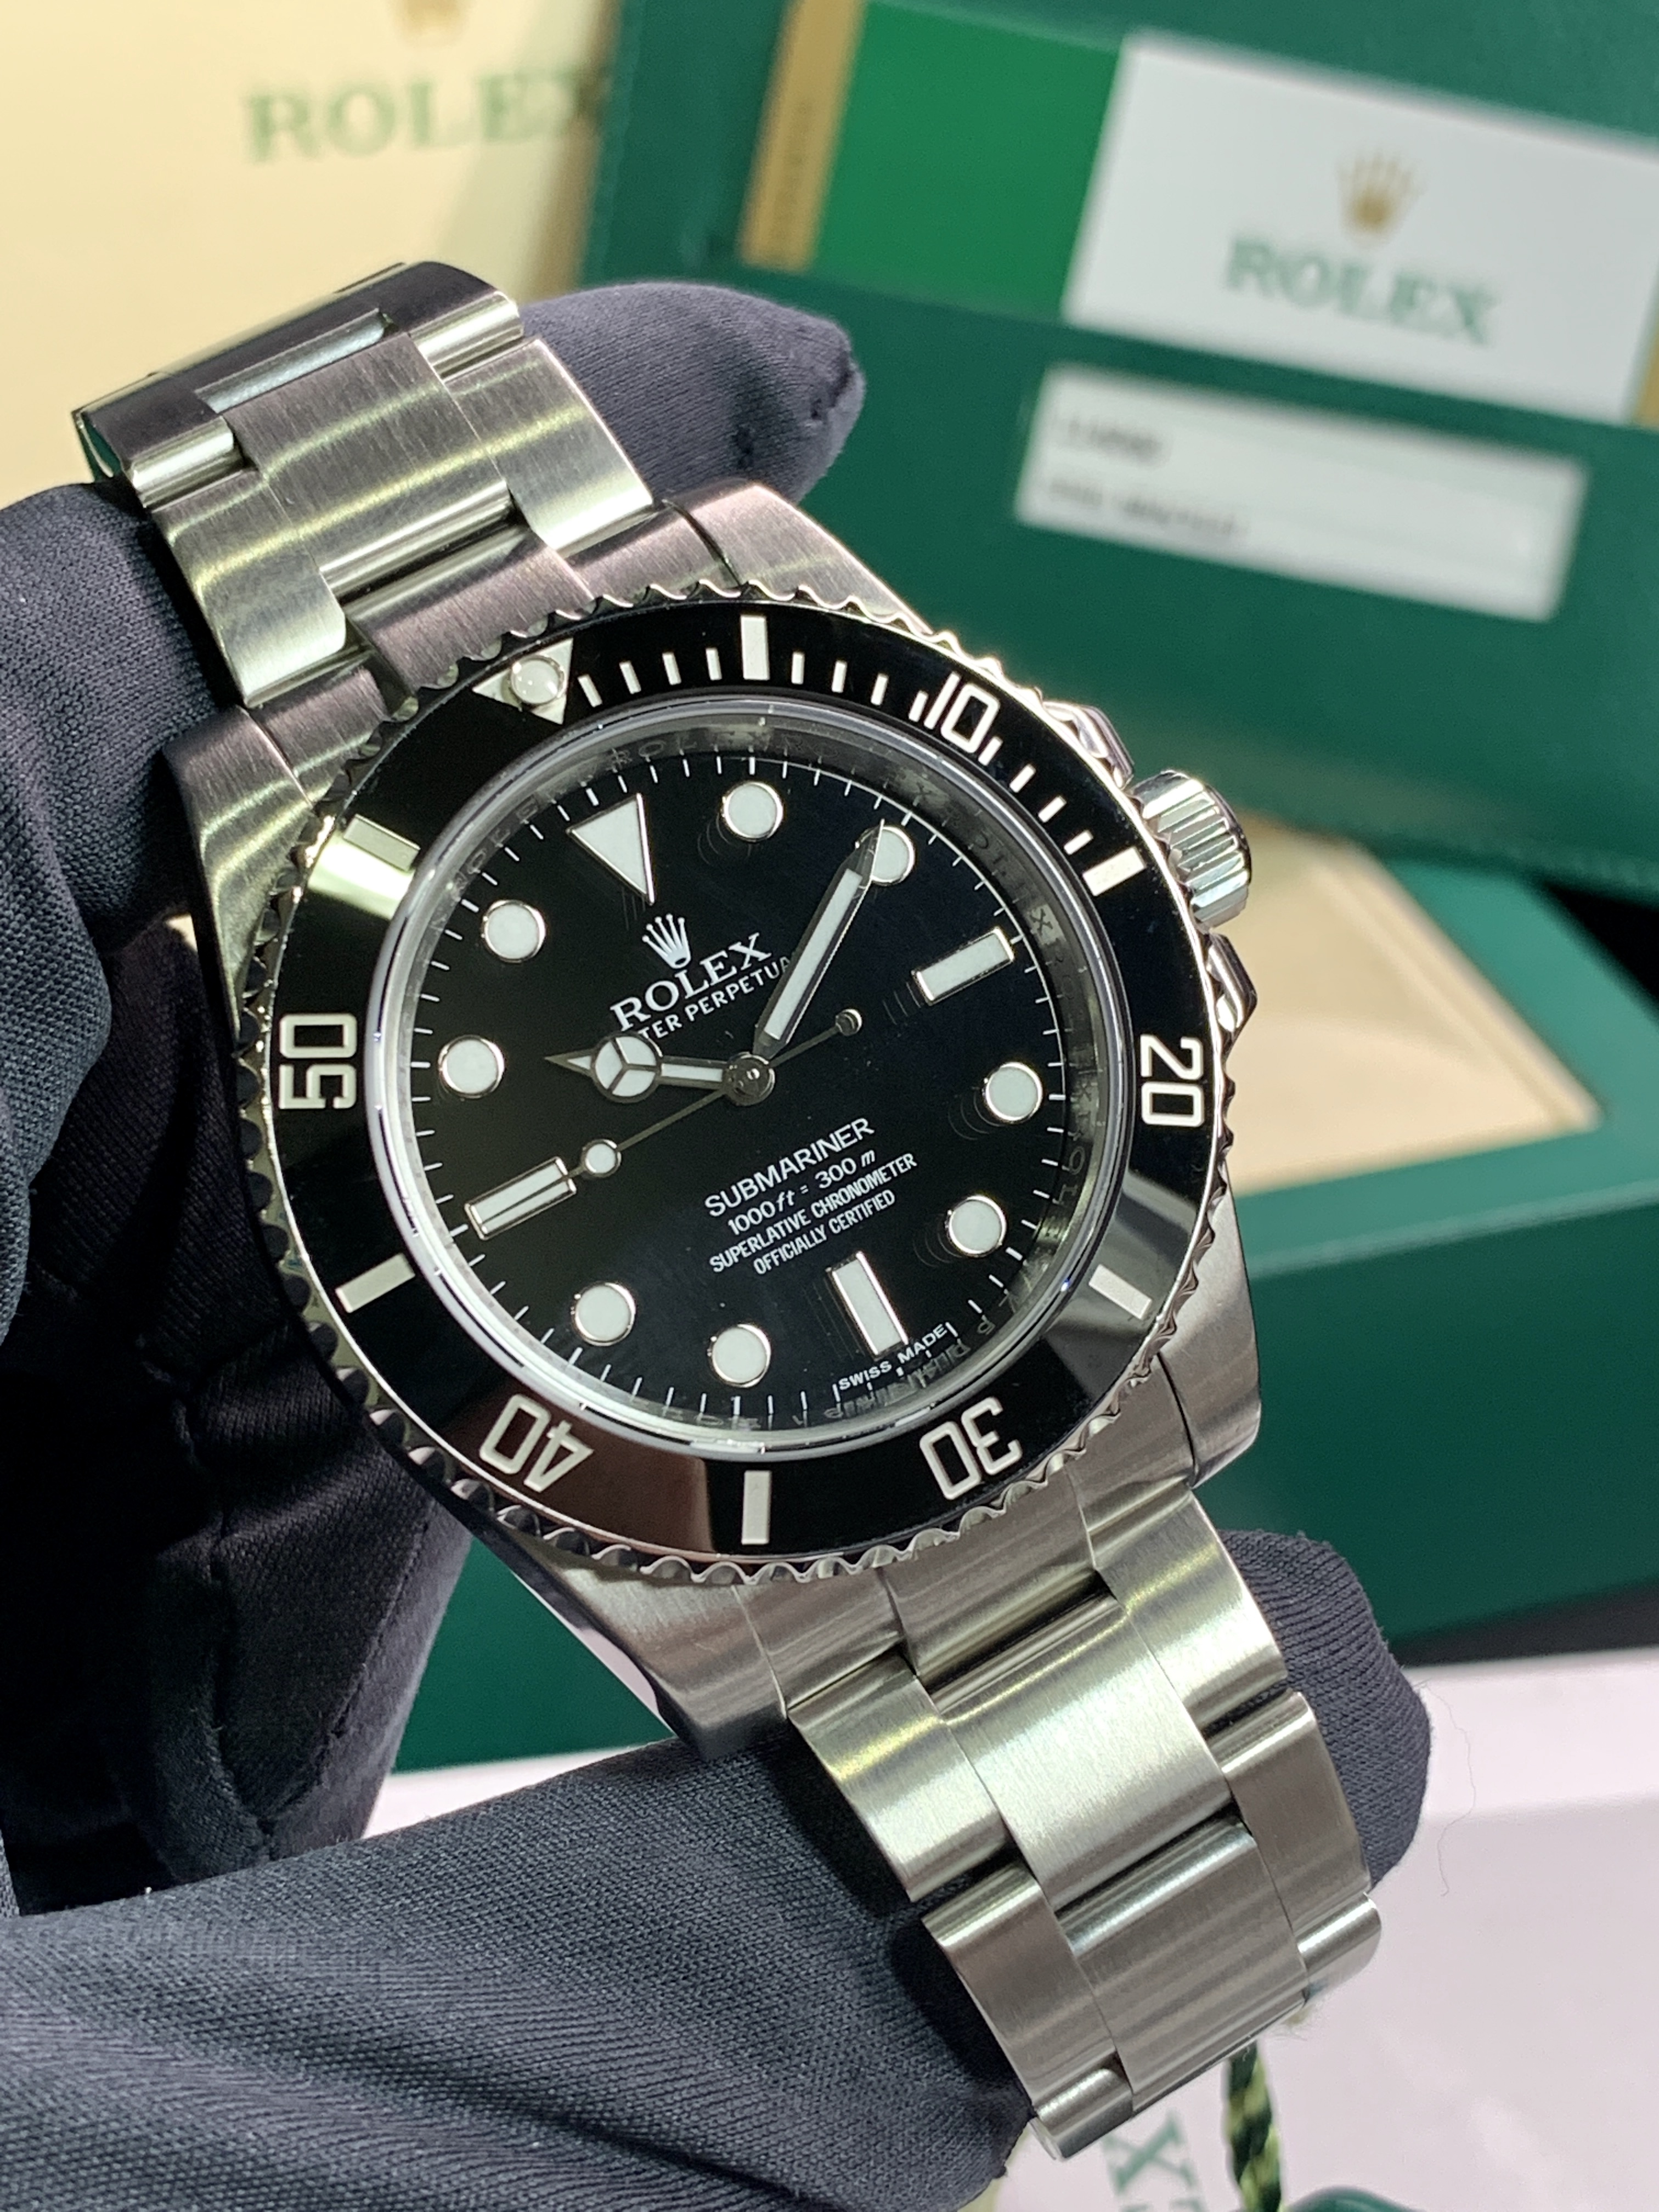 ROLEX SUBMARINER NON DATE STAINLESS STEEL 114060 - Carr Watches